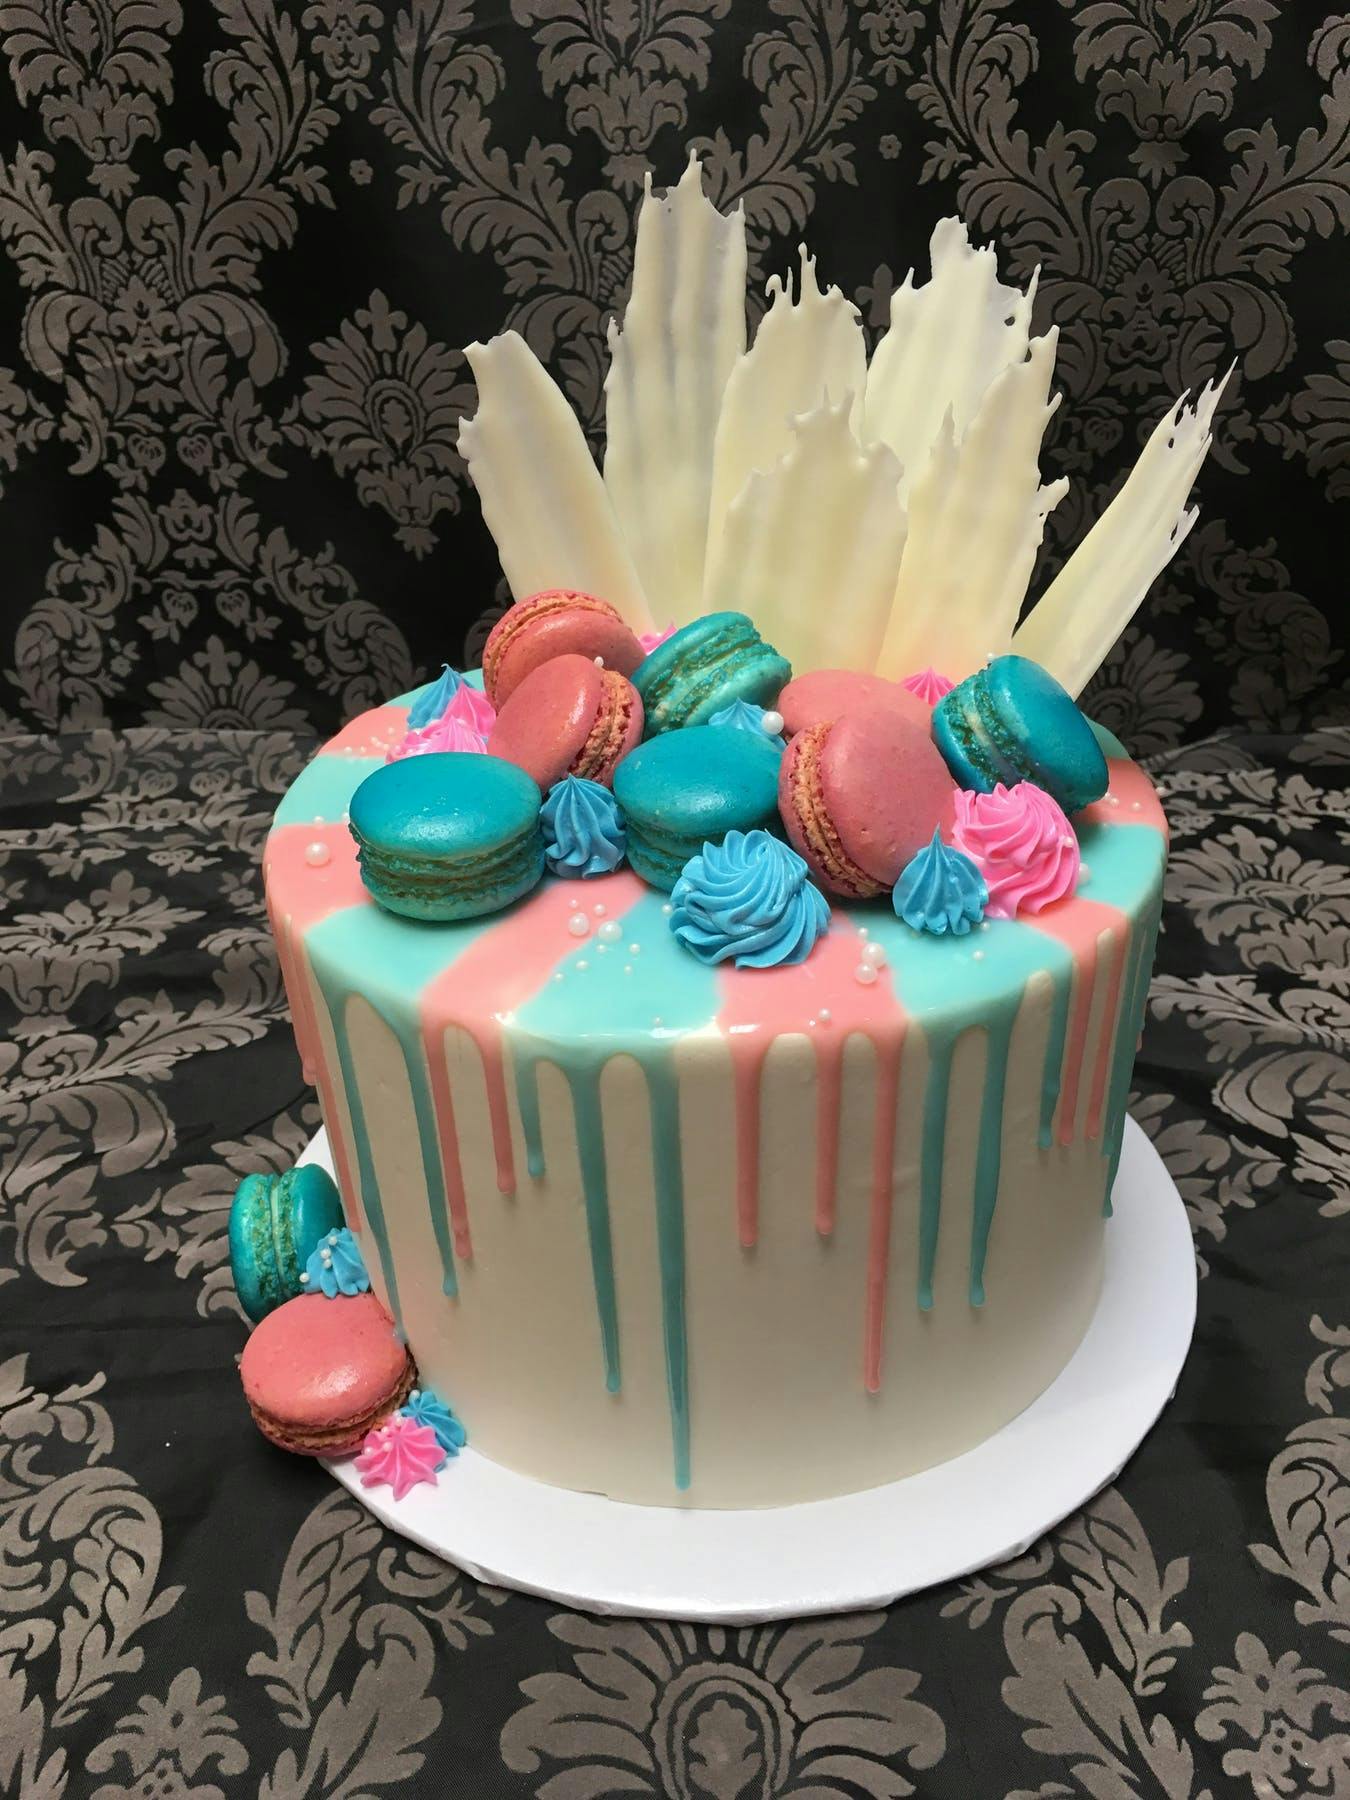 Baby Shower / Gender Reveal Cakes | Michelle's Patisserie -Bakery and ...